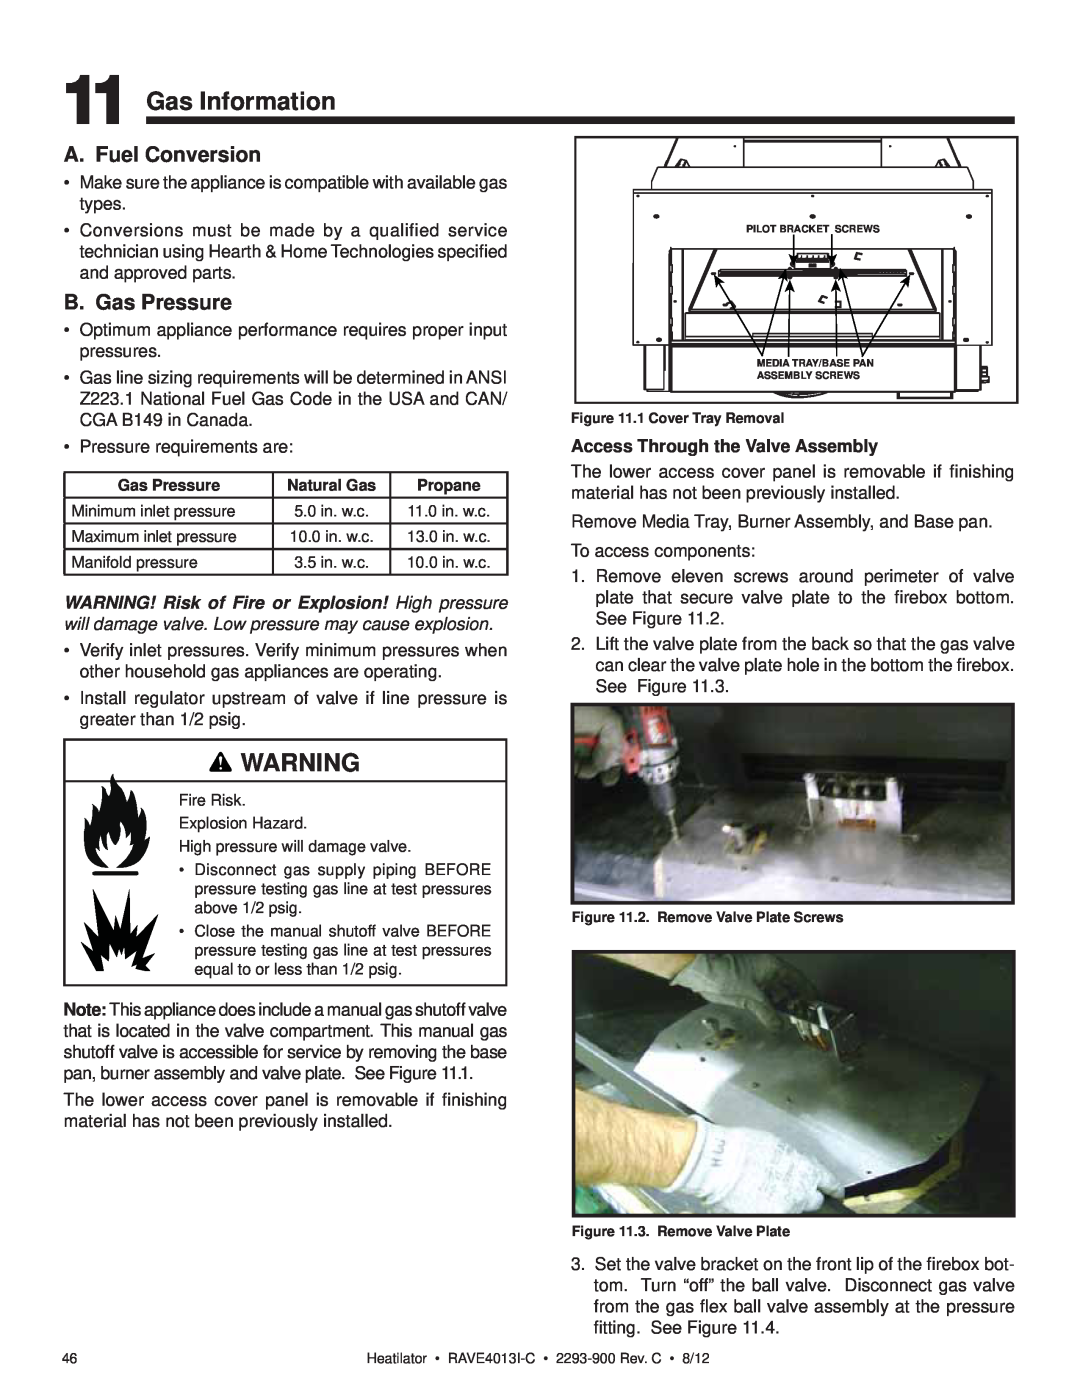 Heatiator Rave4013i-c owner manual Gas Information, A. Fuel Conversion, B. Gas Pressure 